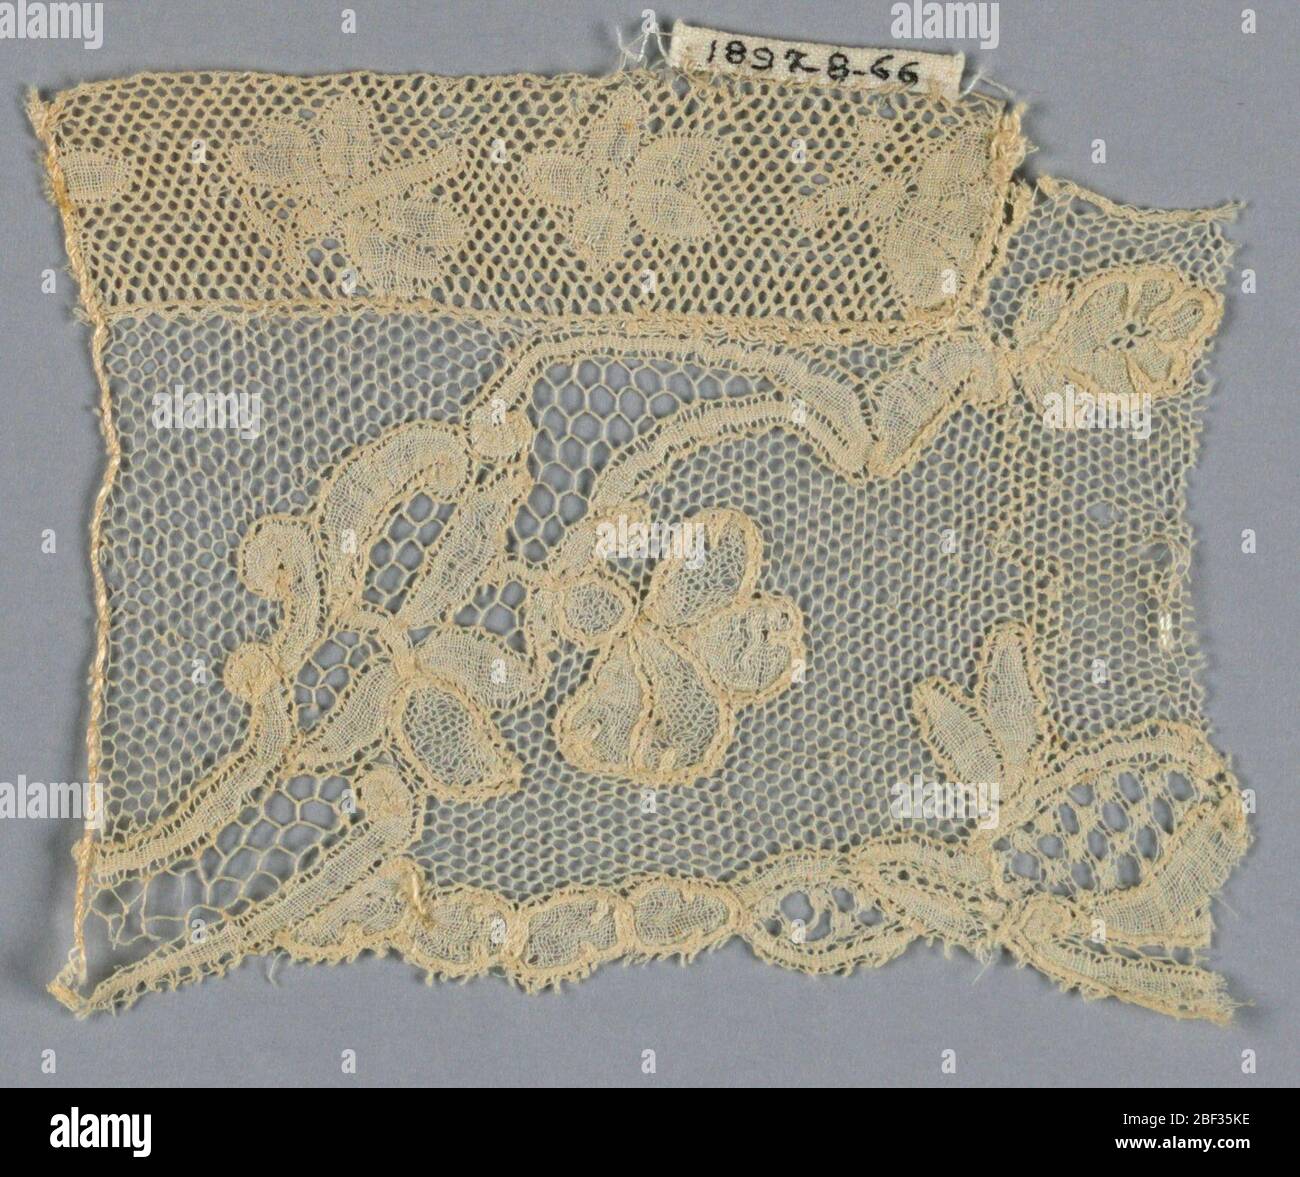 Fragment. Fragment of Brussels lace with a scroll and connected ovals has decorative and clothwork fillings. Flower sprigs form part of the scrolling form. Vrai droschel ground and a small border a Valenciennes-style fragment to top. Stock Photo